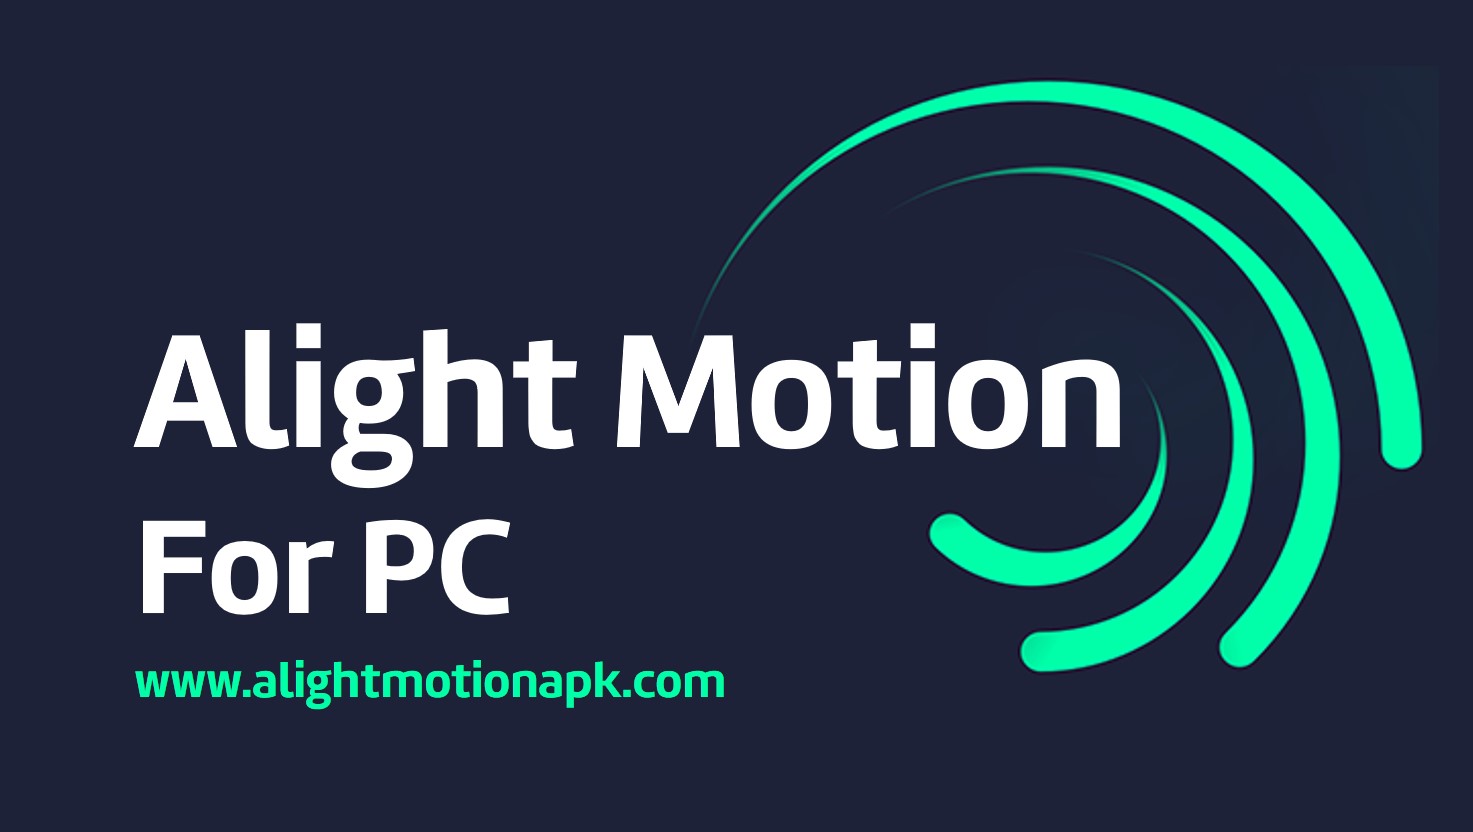 Alight Motion for PC Download | Windows and Mac | Video and Animation Editor